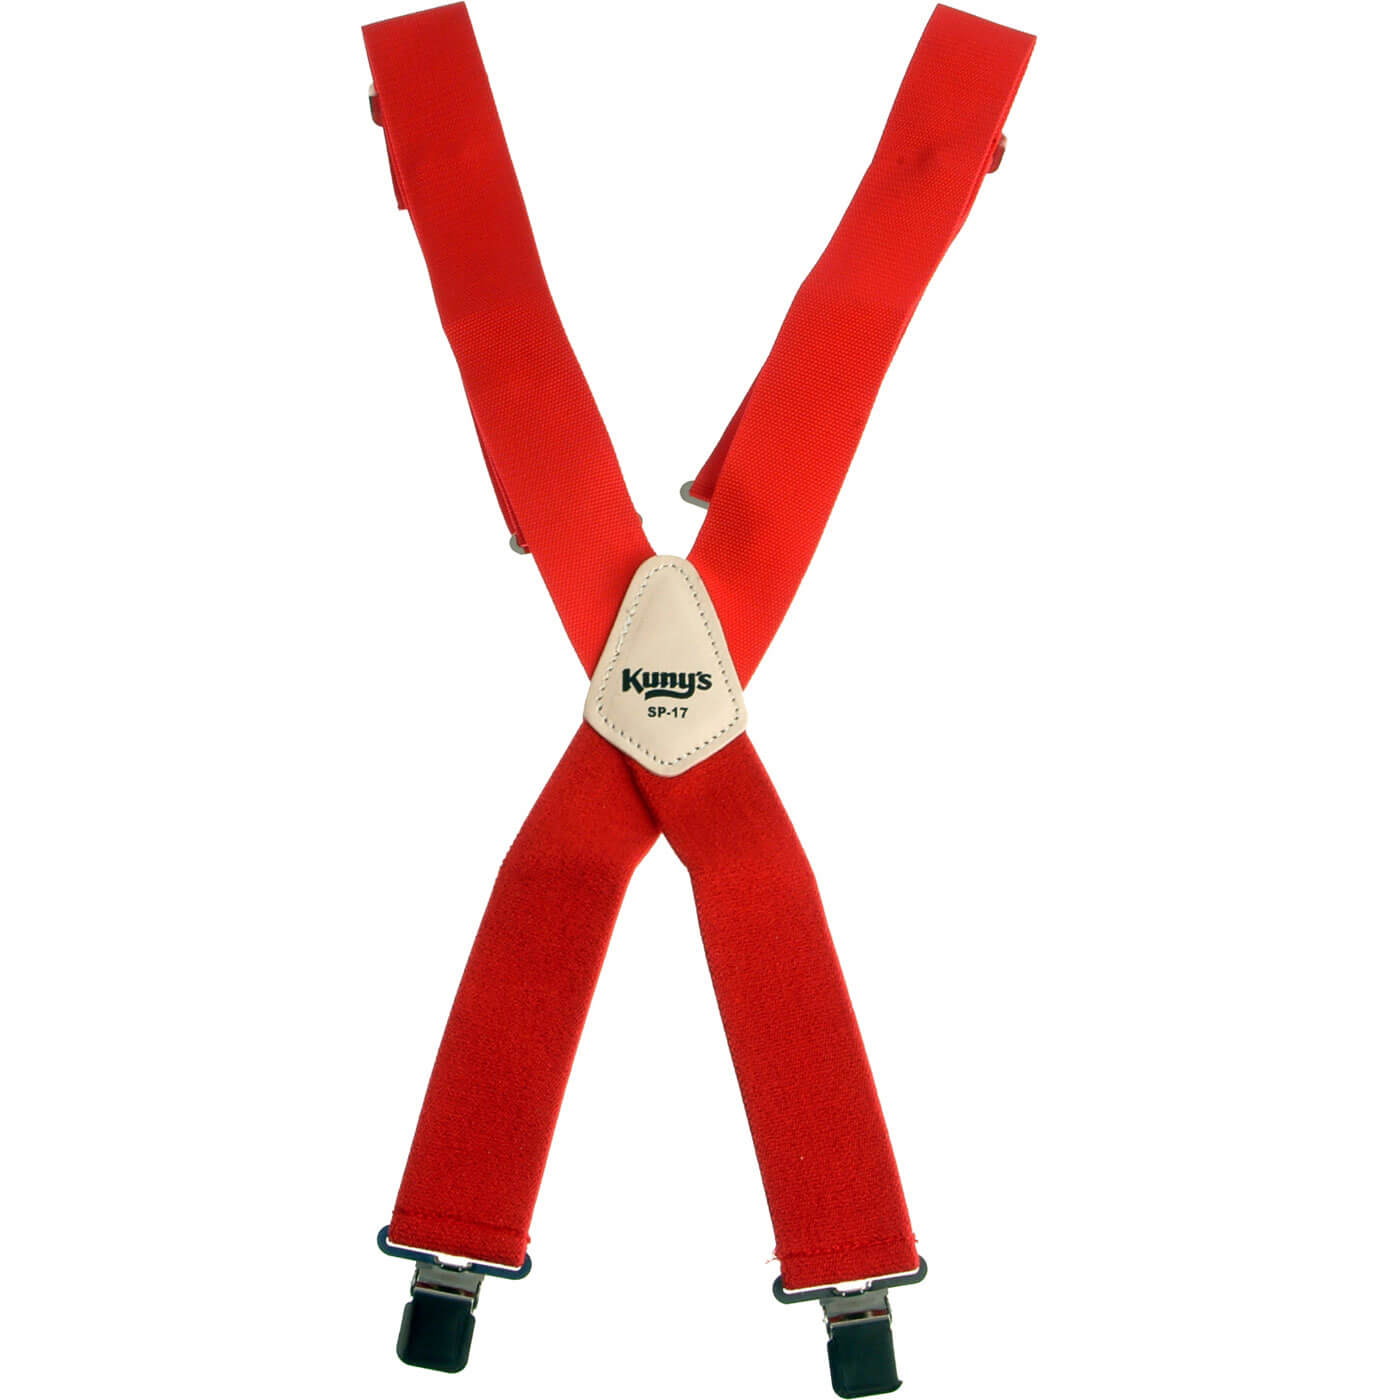 Image of Kunys Work Trousers Braces Red